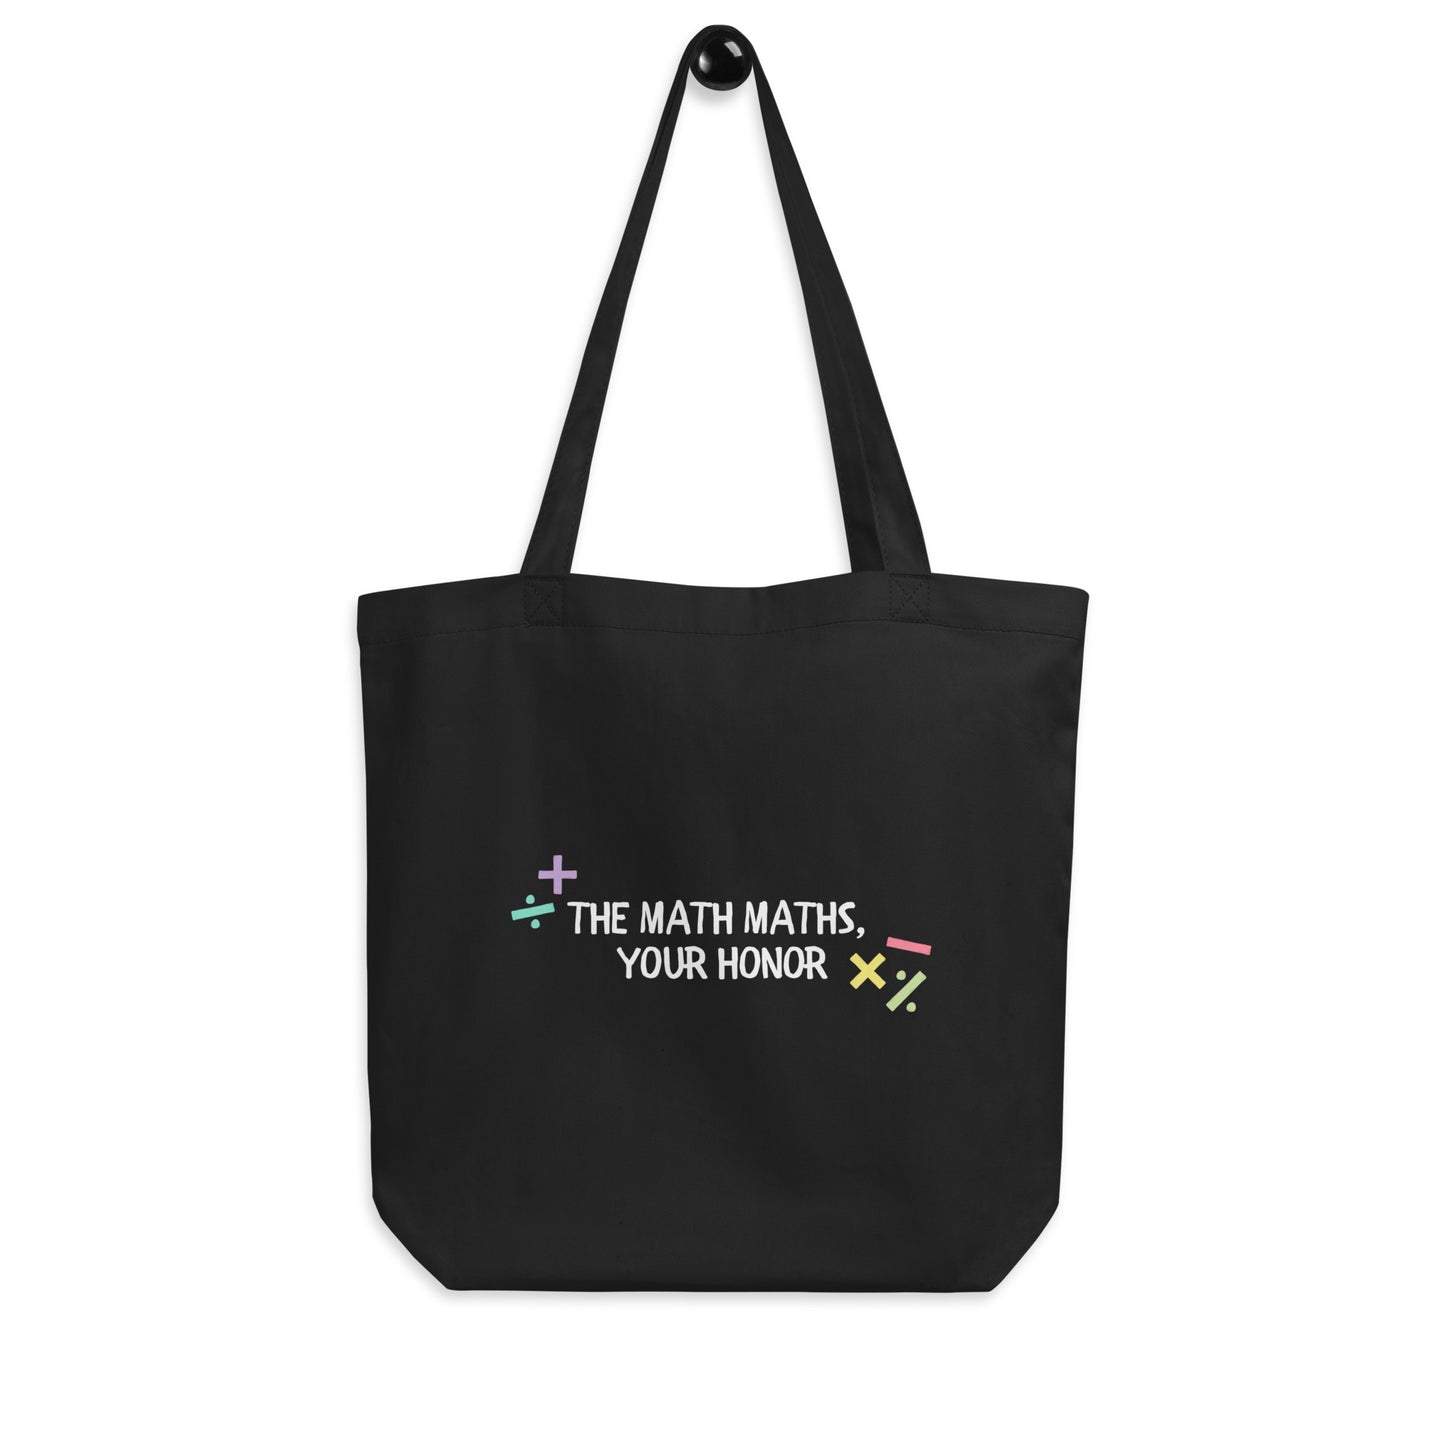 The Math Maths, Your Honor Tote Bag